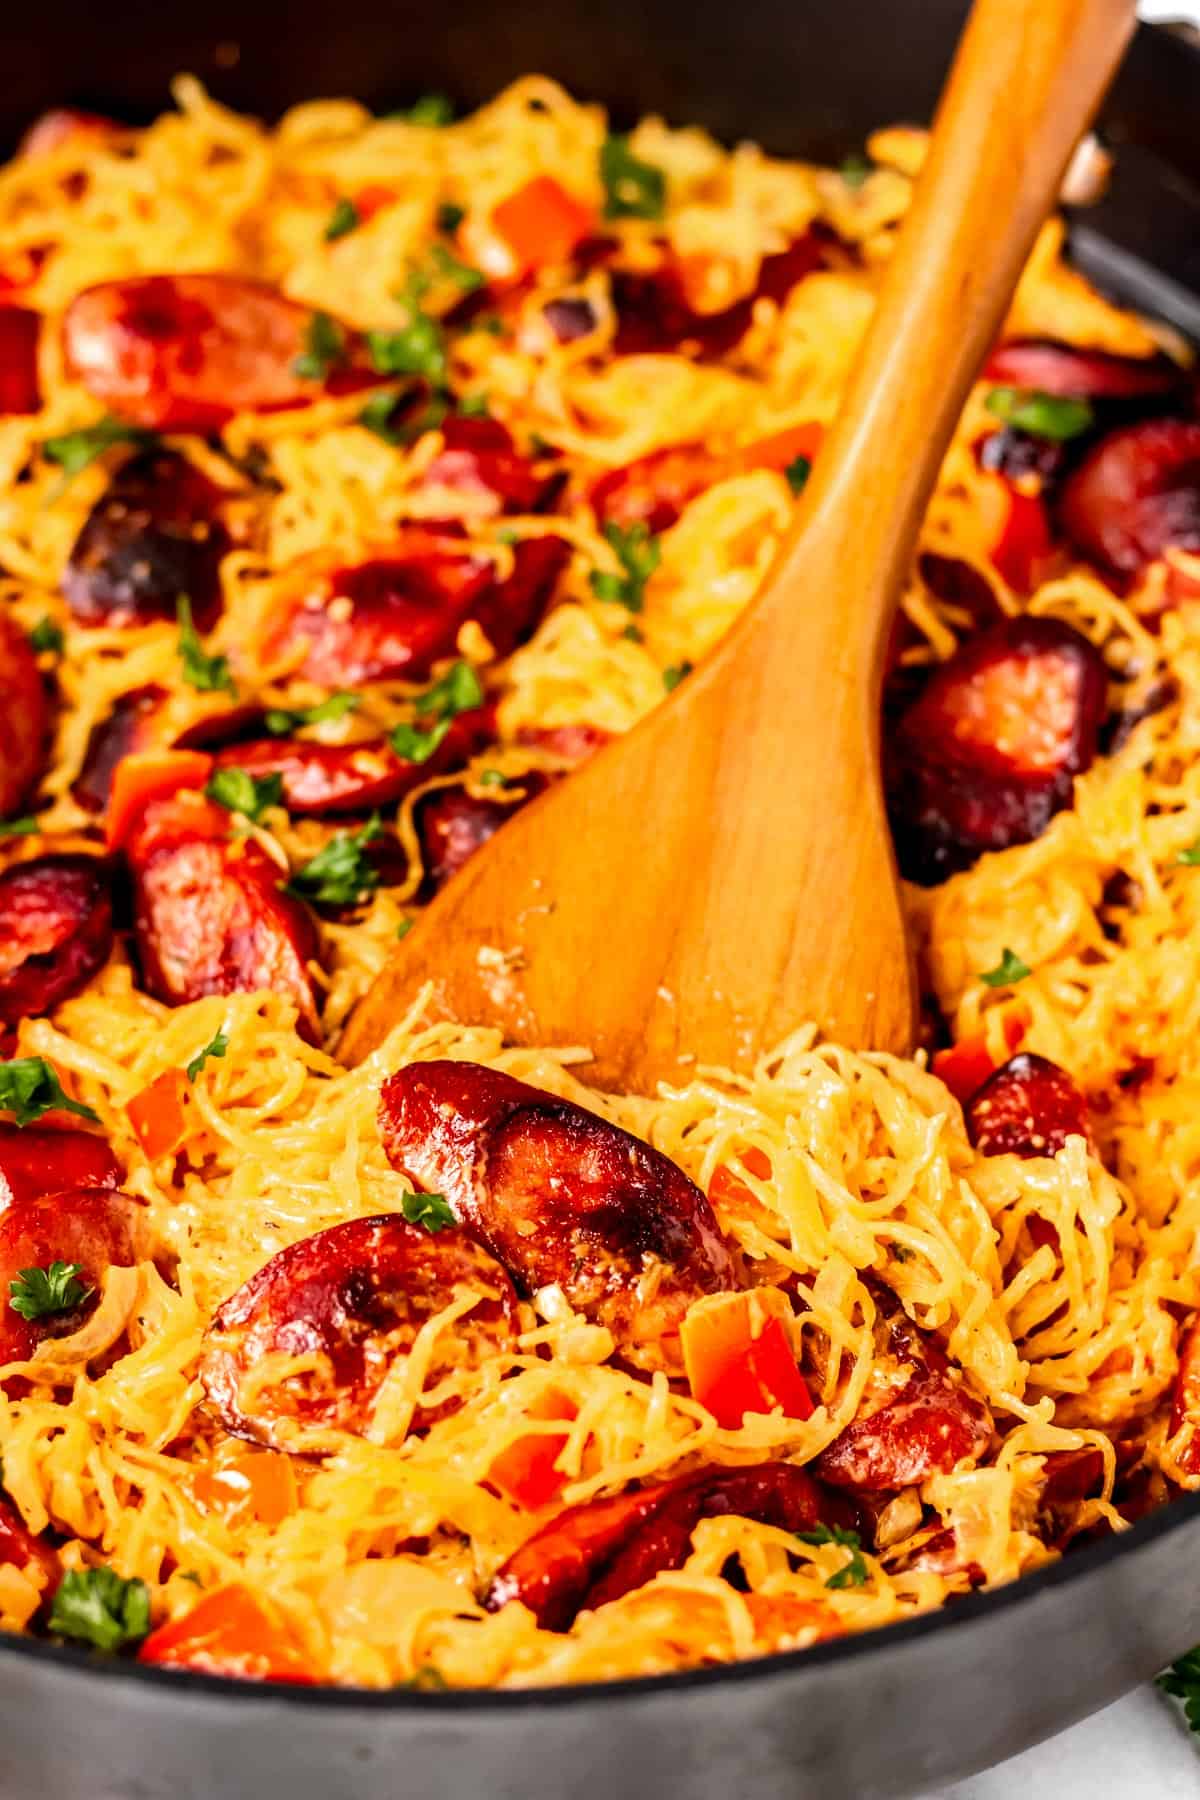 Close up of a wood server lifting up some of the Italian Sausage Spaghetti Squash.